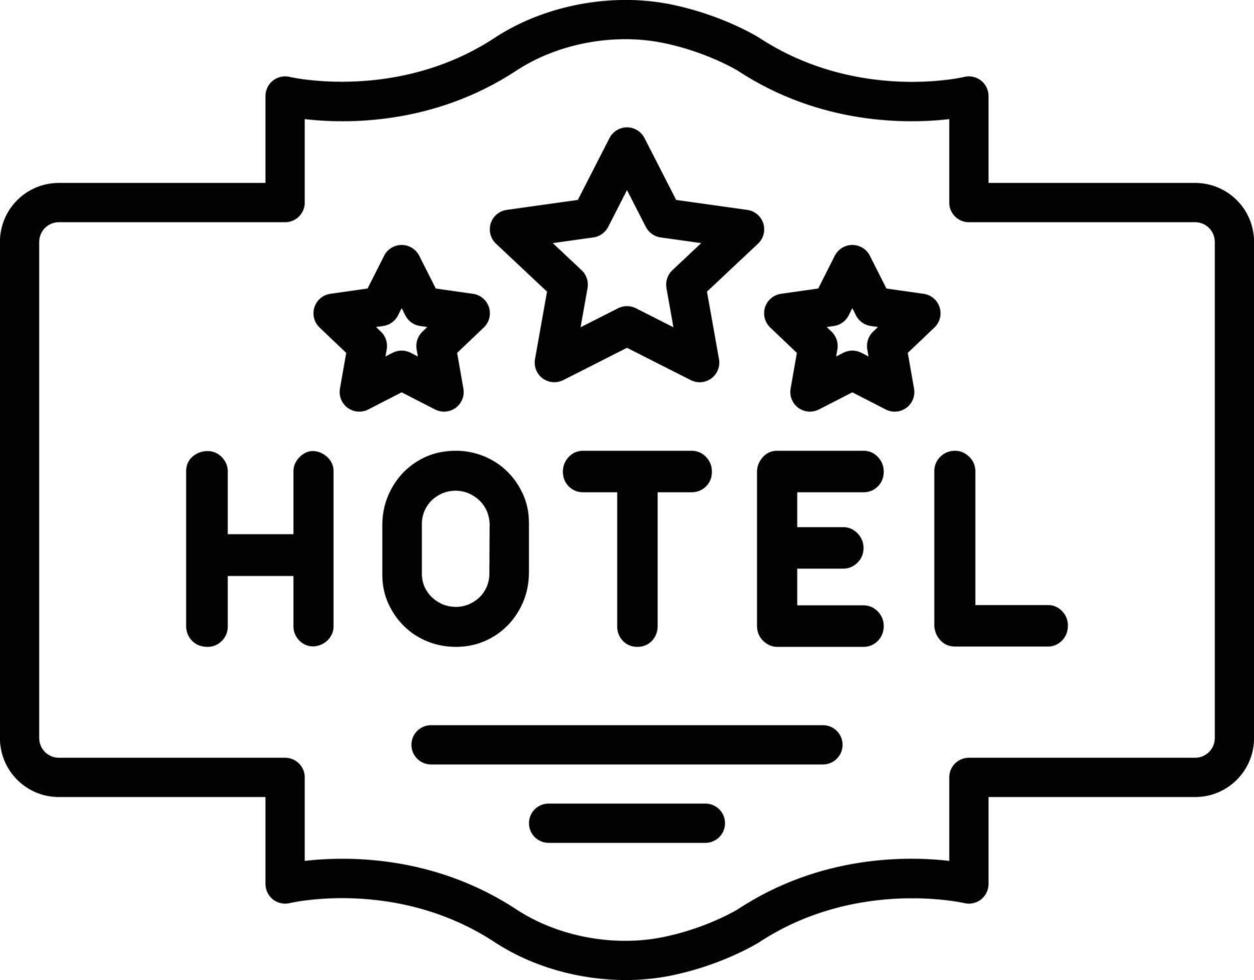 Line icon for hotel sign vector